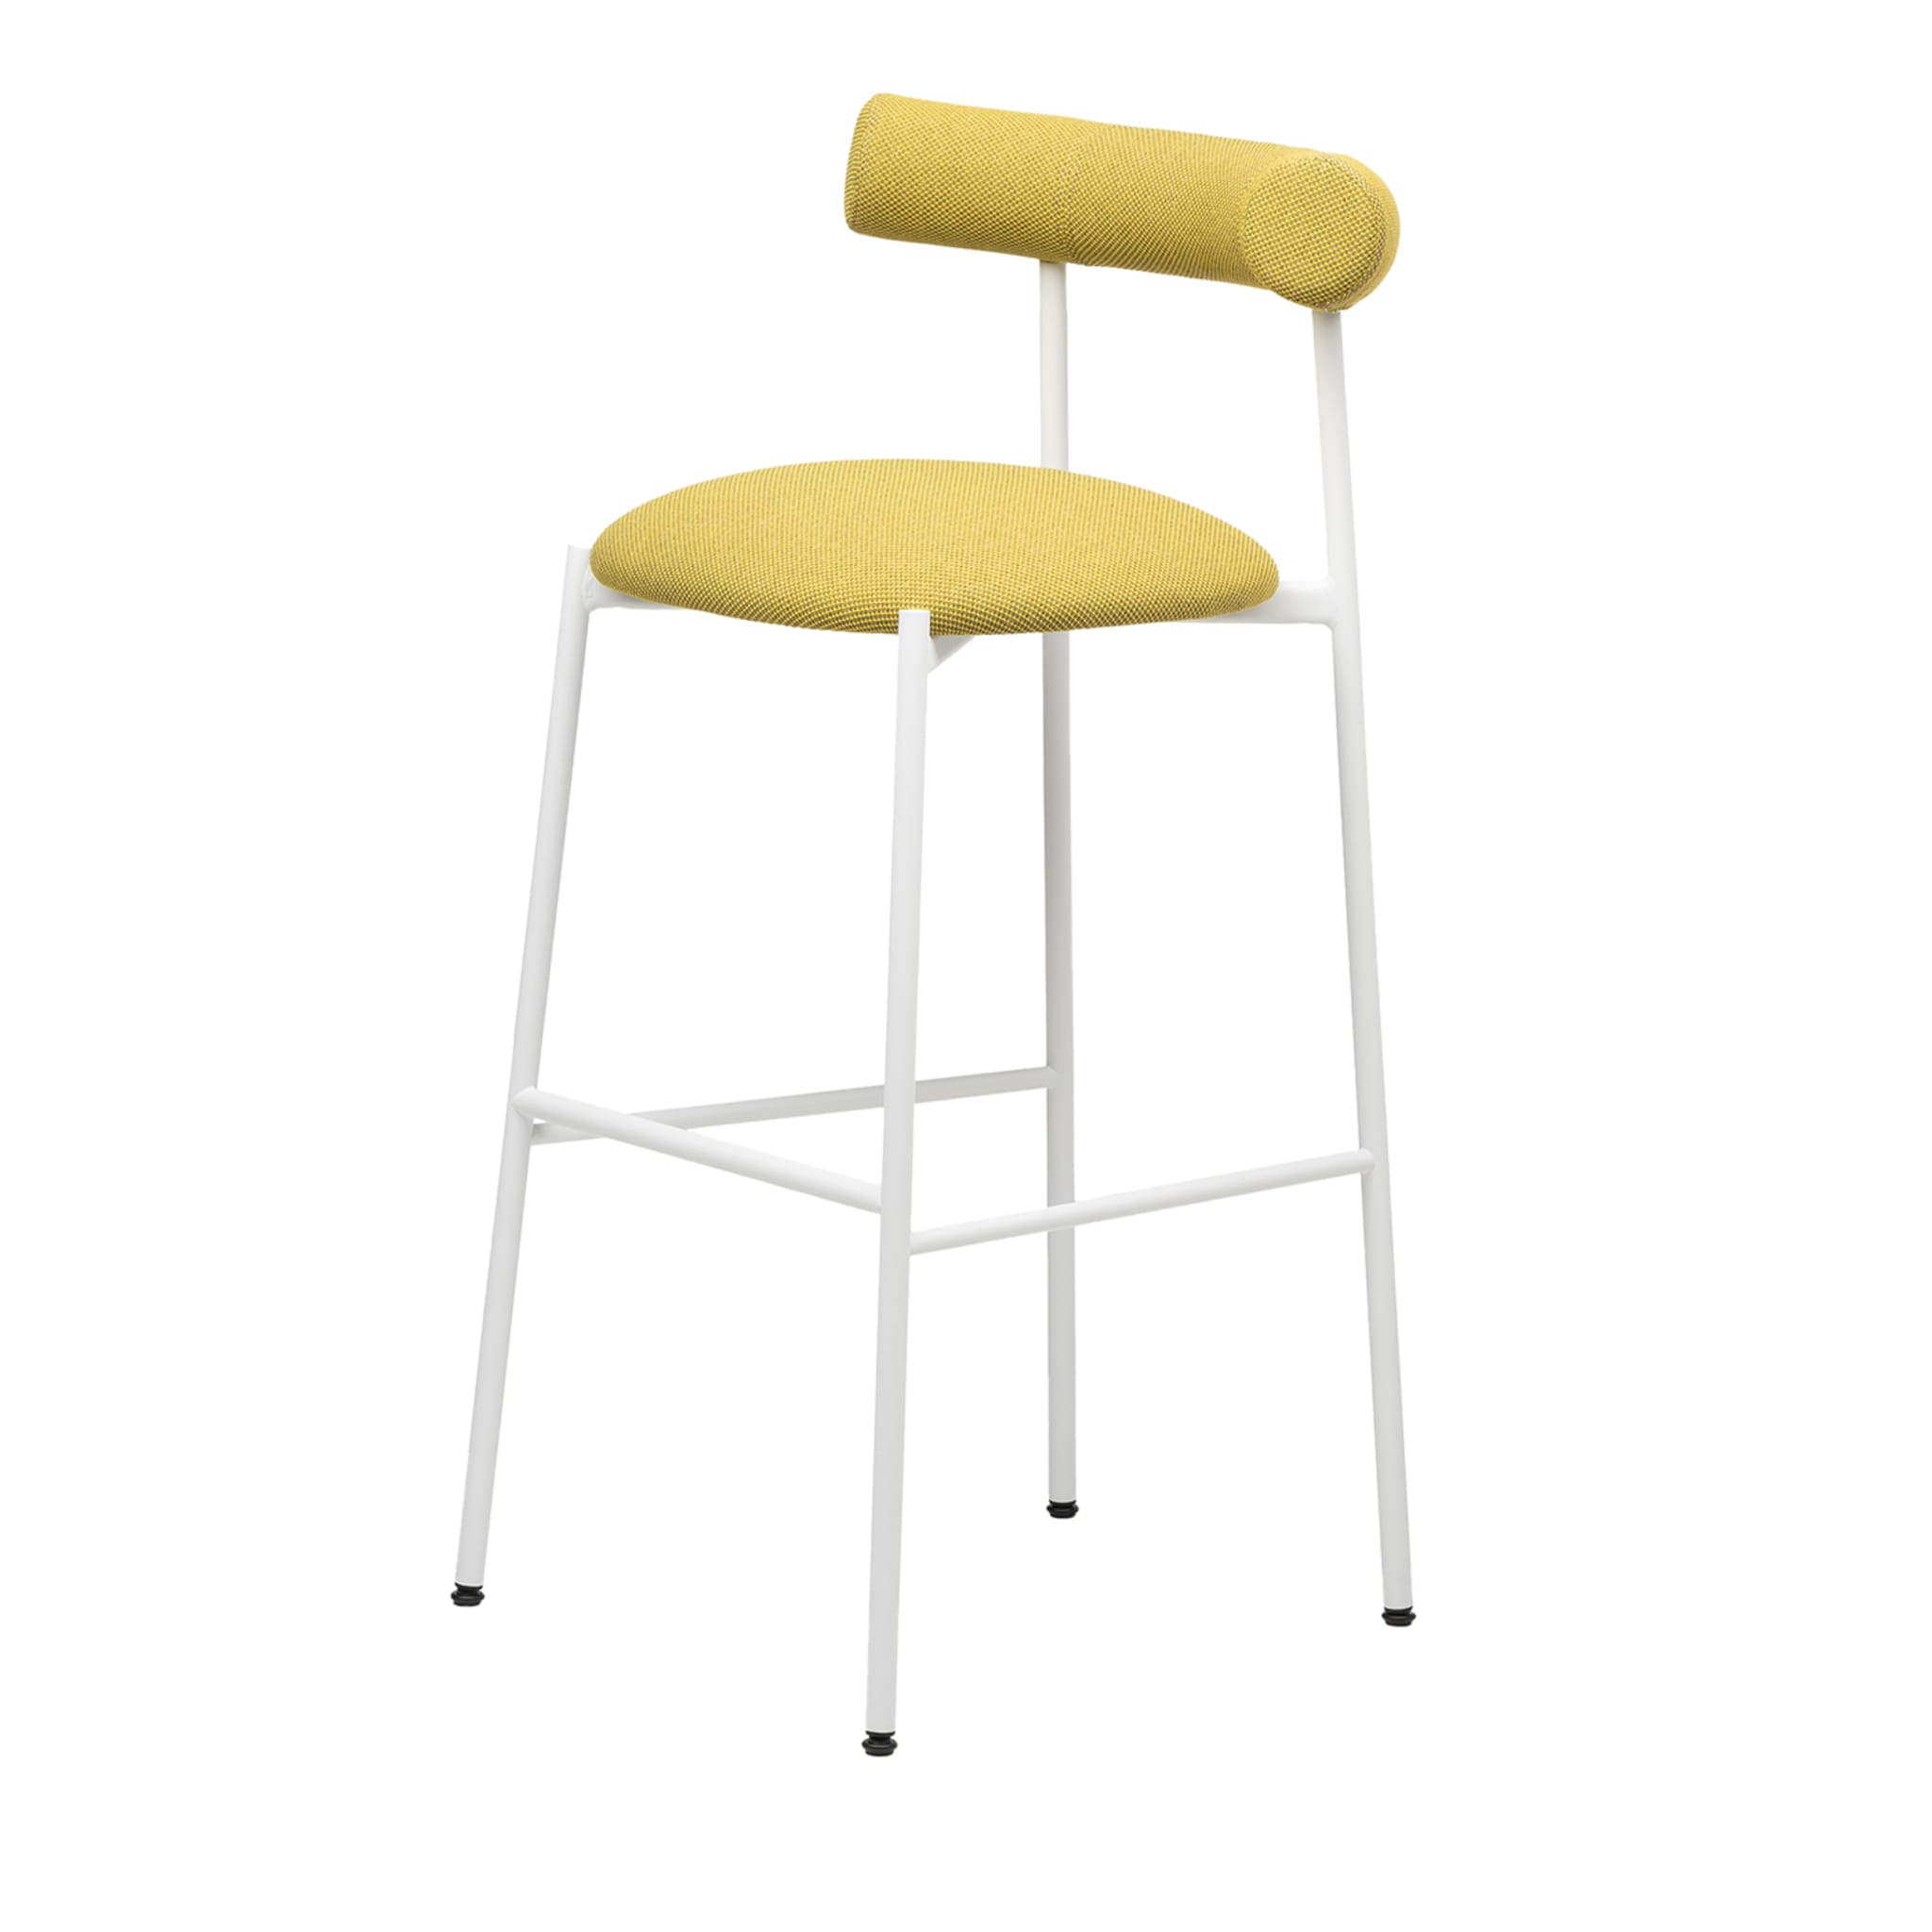 Pampa SG-80 Lime-Green & White Stool by Studio Pastina - Main view